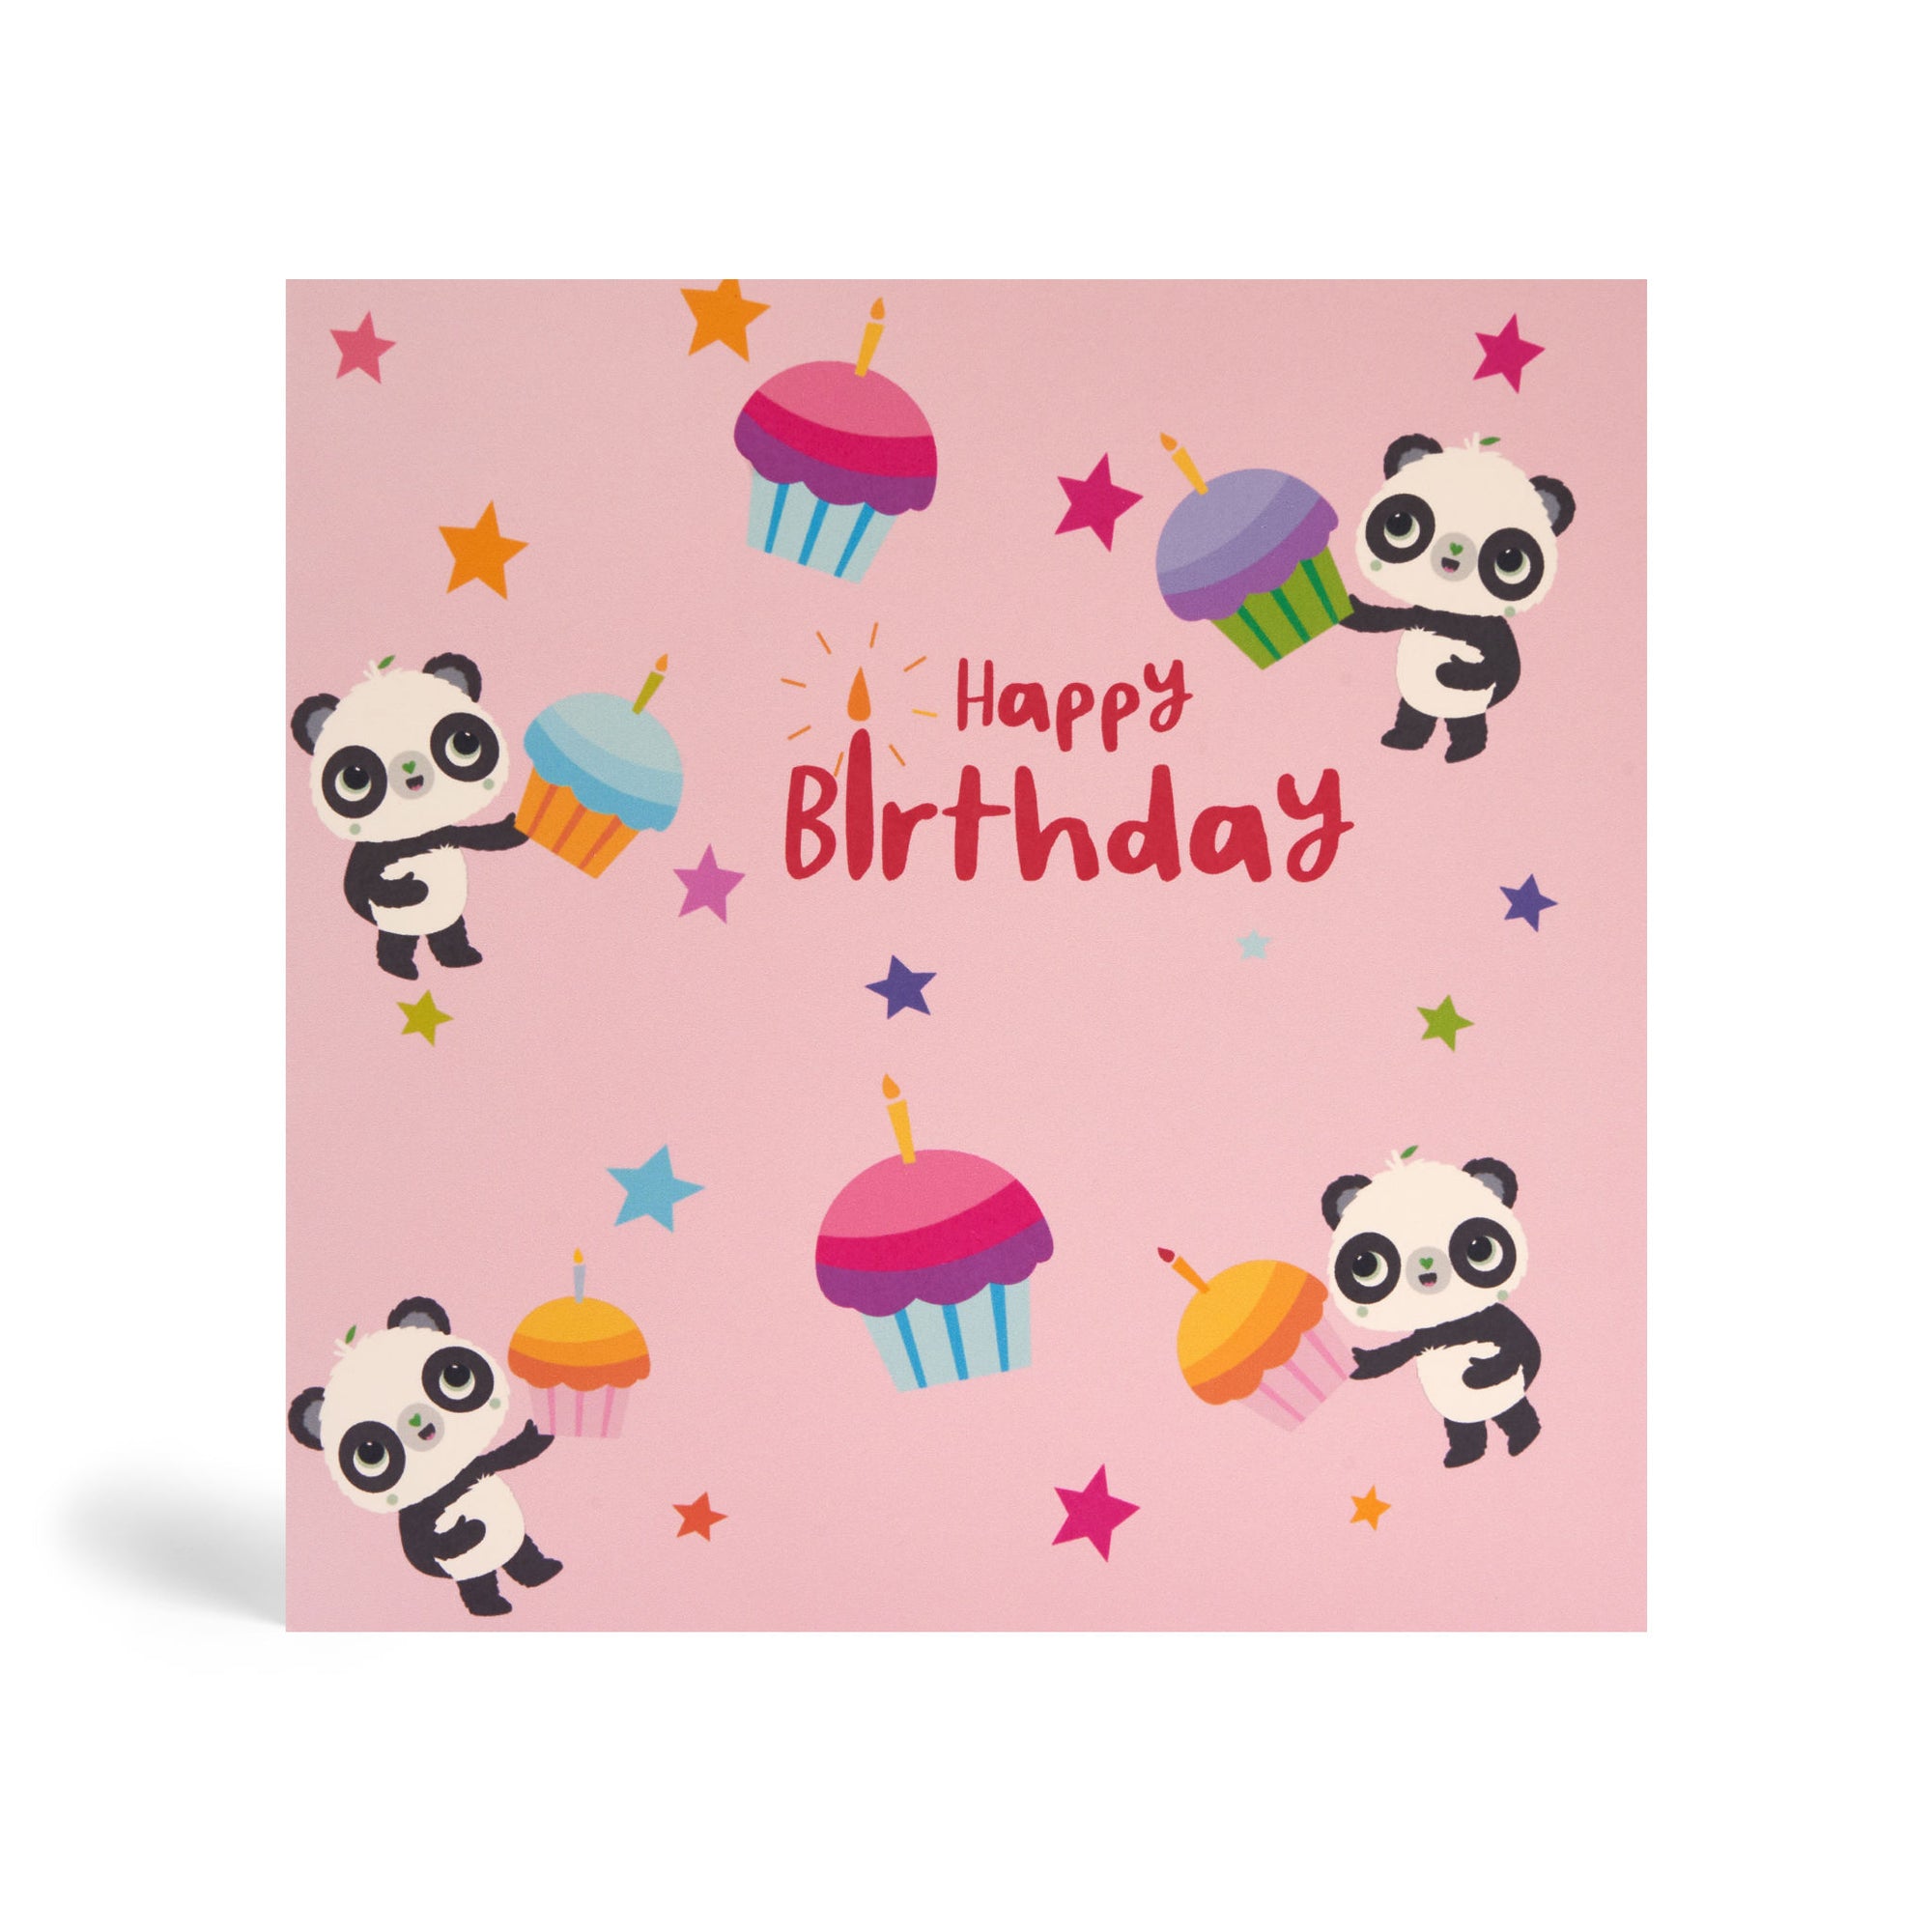 150mm square eco-friendly, tree free, pink background happy birthday greeting with four Pandas holding birthday cupcakes with different coloured stars in the background.